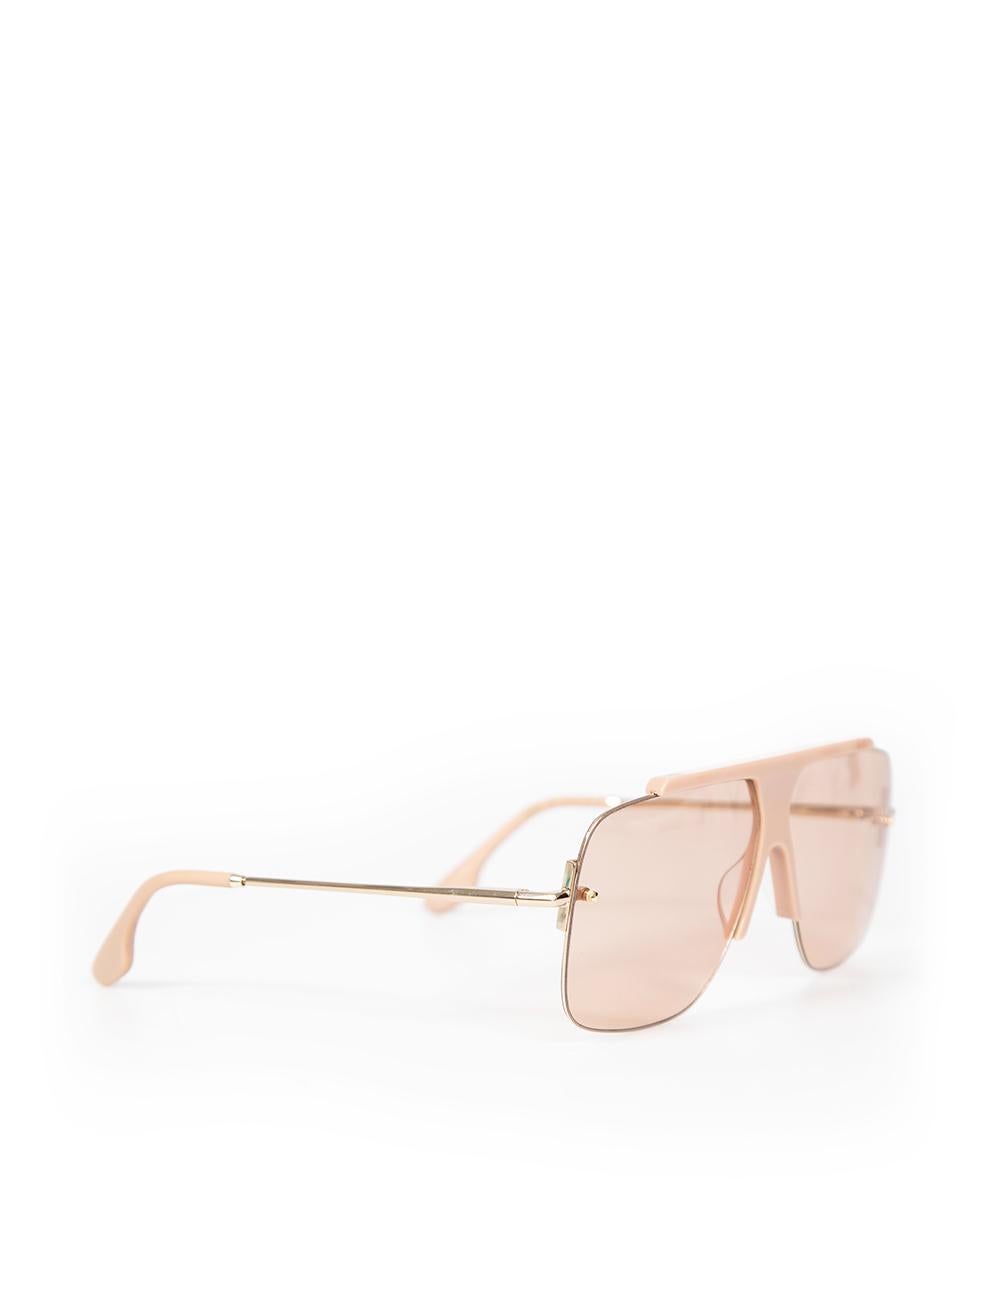 Victoria Beckham Nude Navigator Frame Sunglasses In New Condition For Sale In London, GB